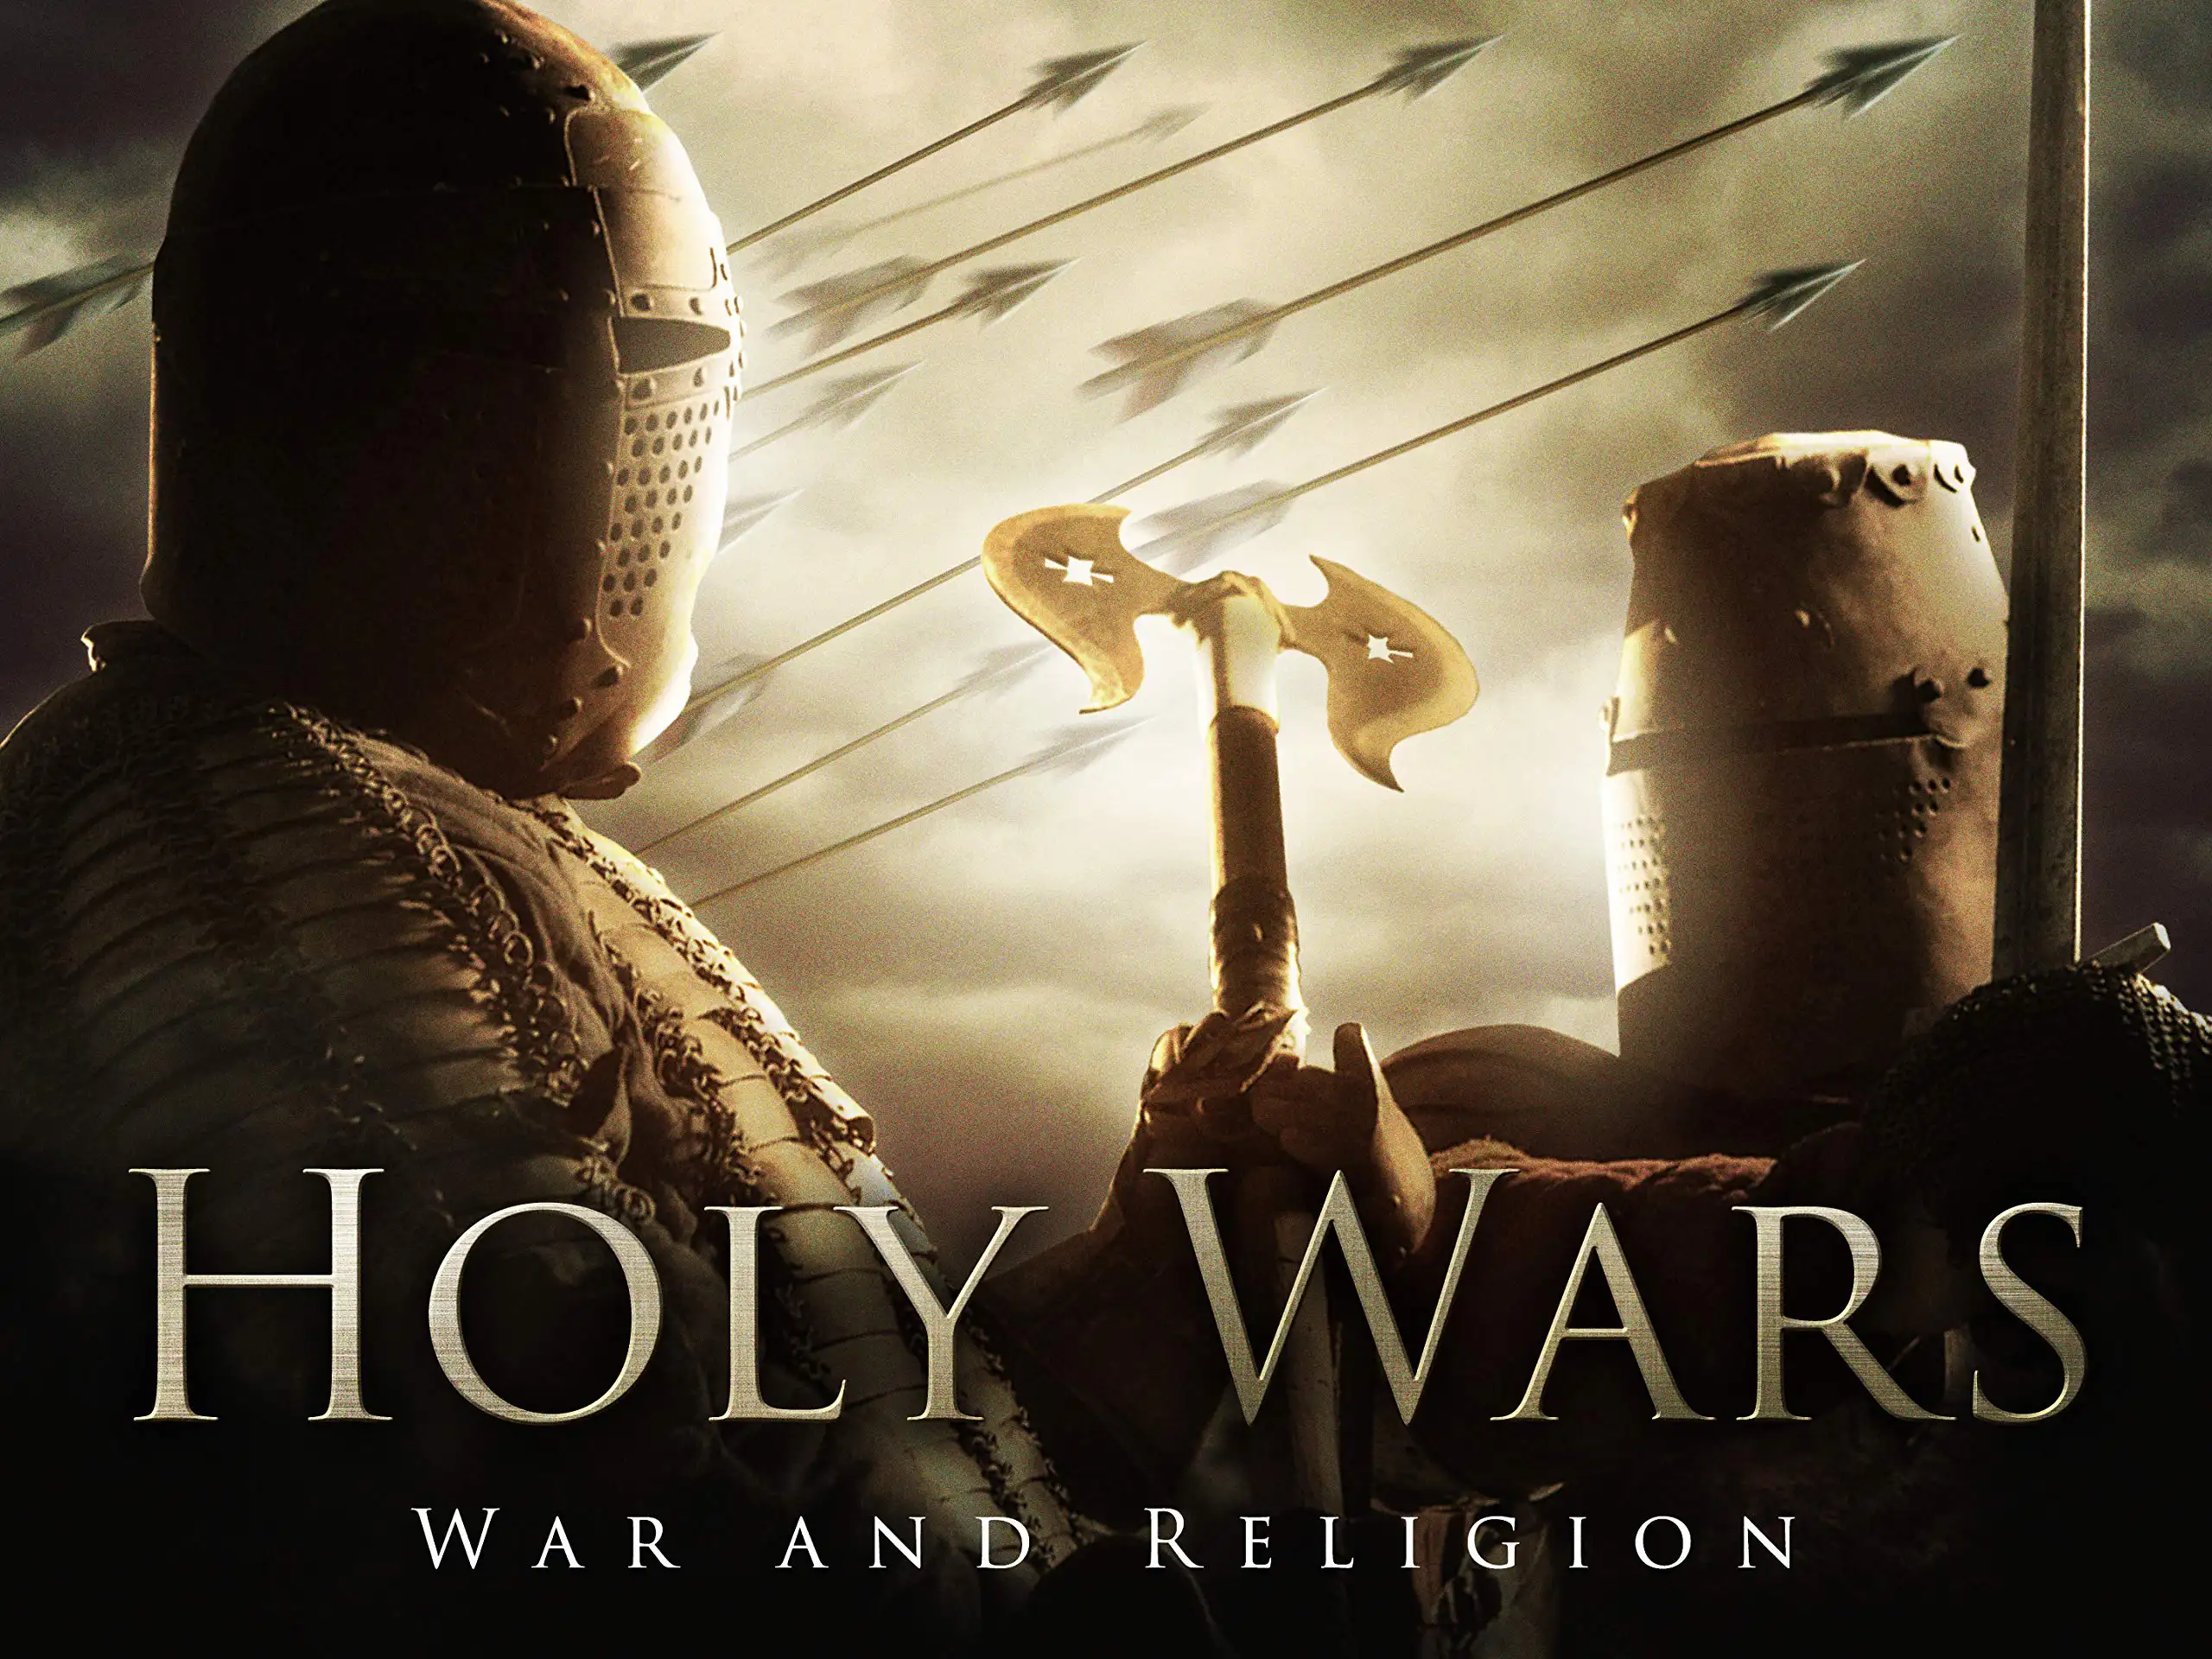 The Holy Wars: War and Religion episode 1